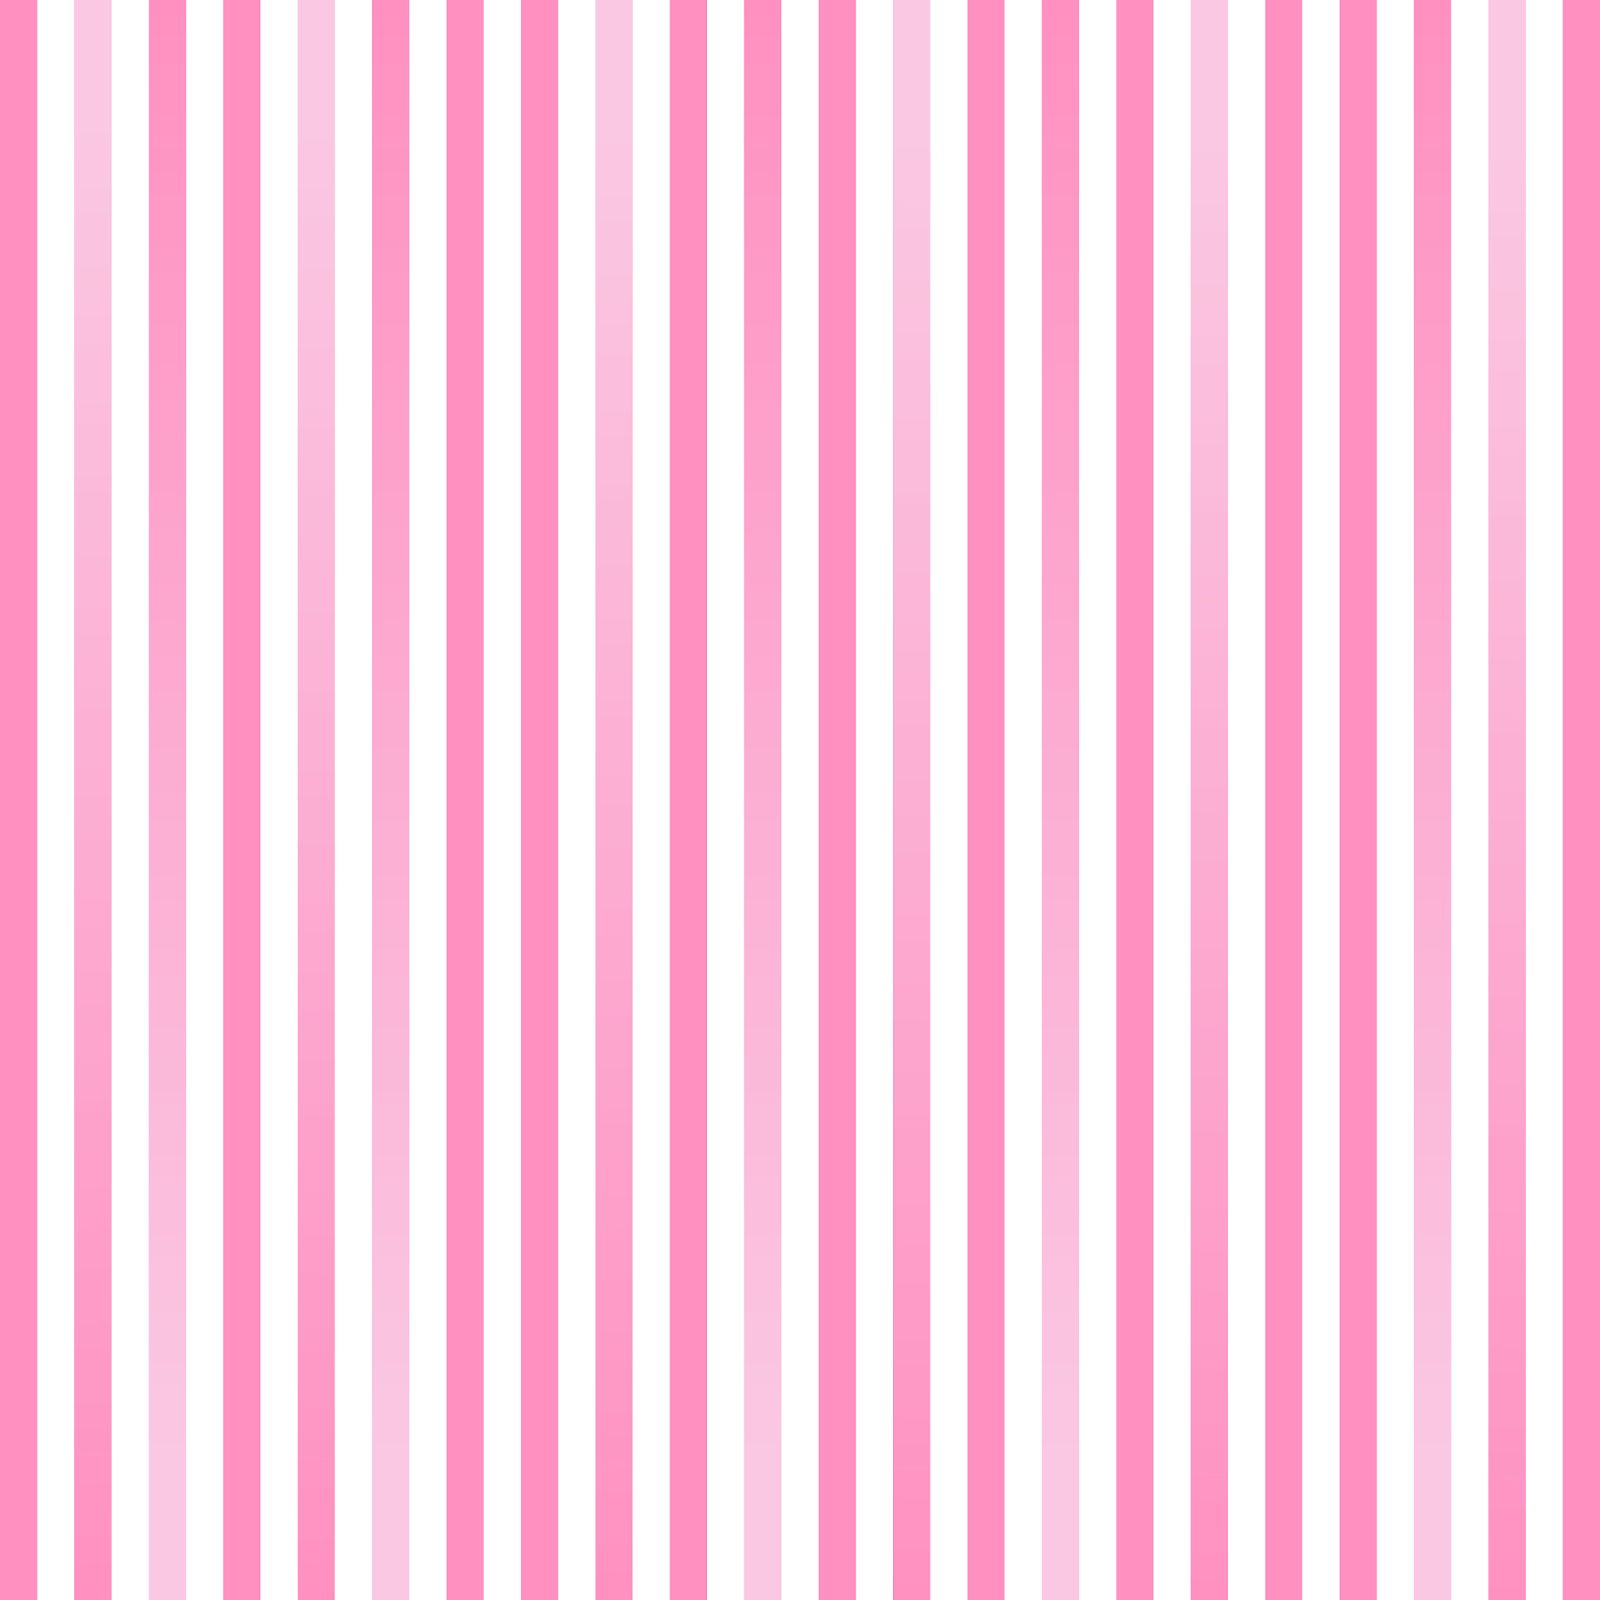 pink background png. Background Check All